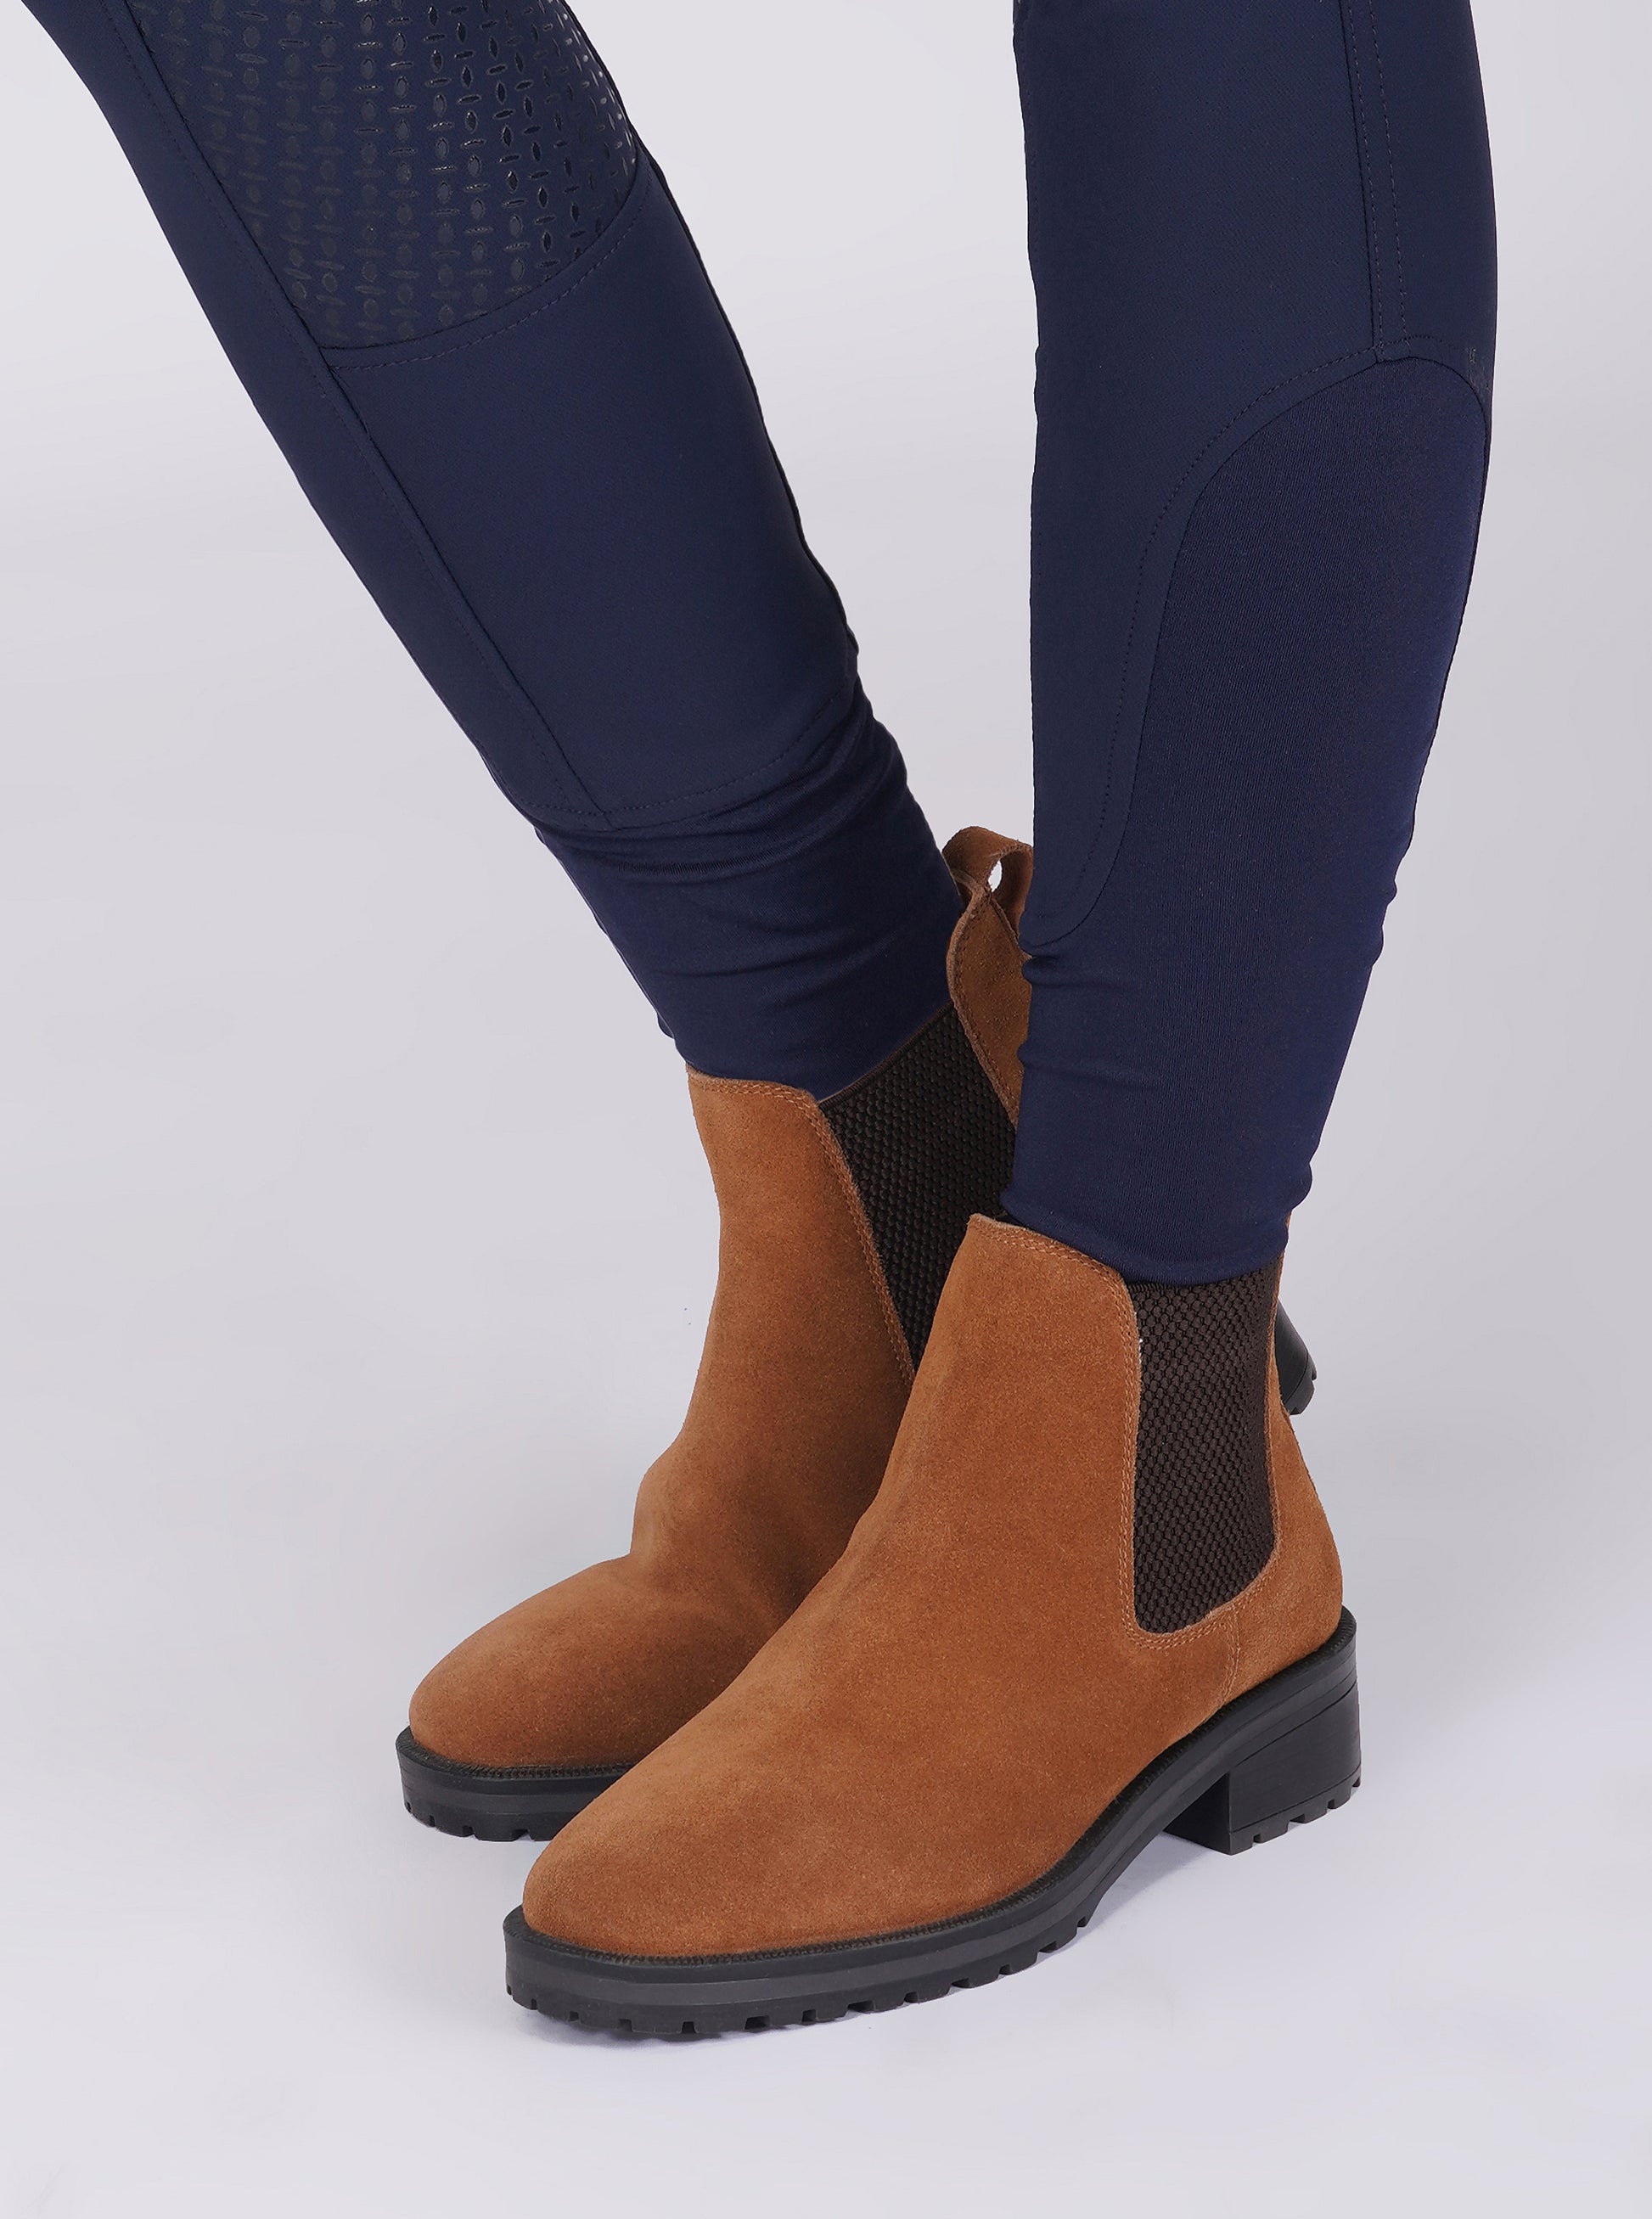 PERU Max chelsea, Ankle riding boots.